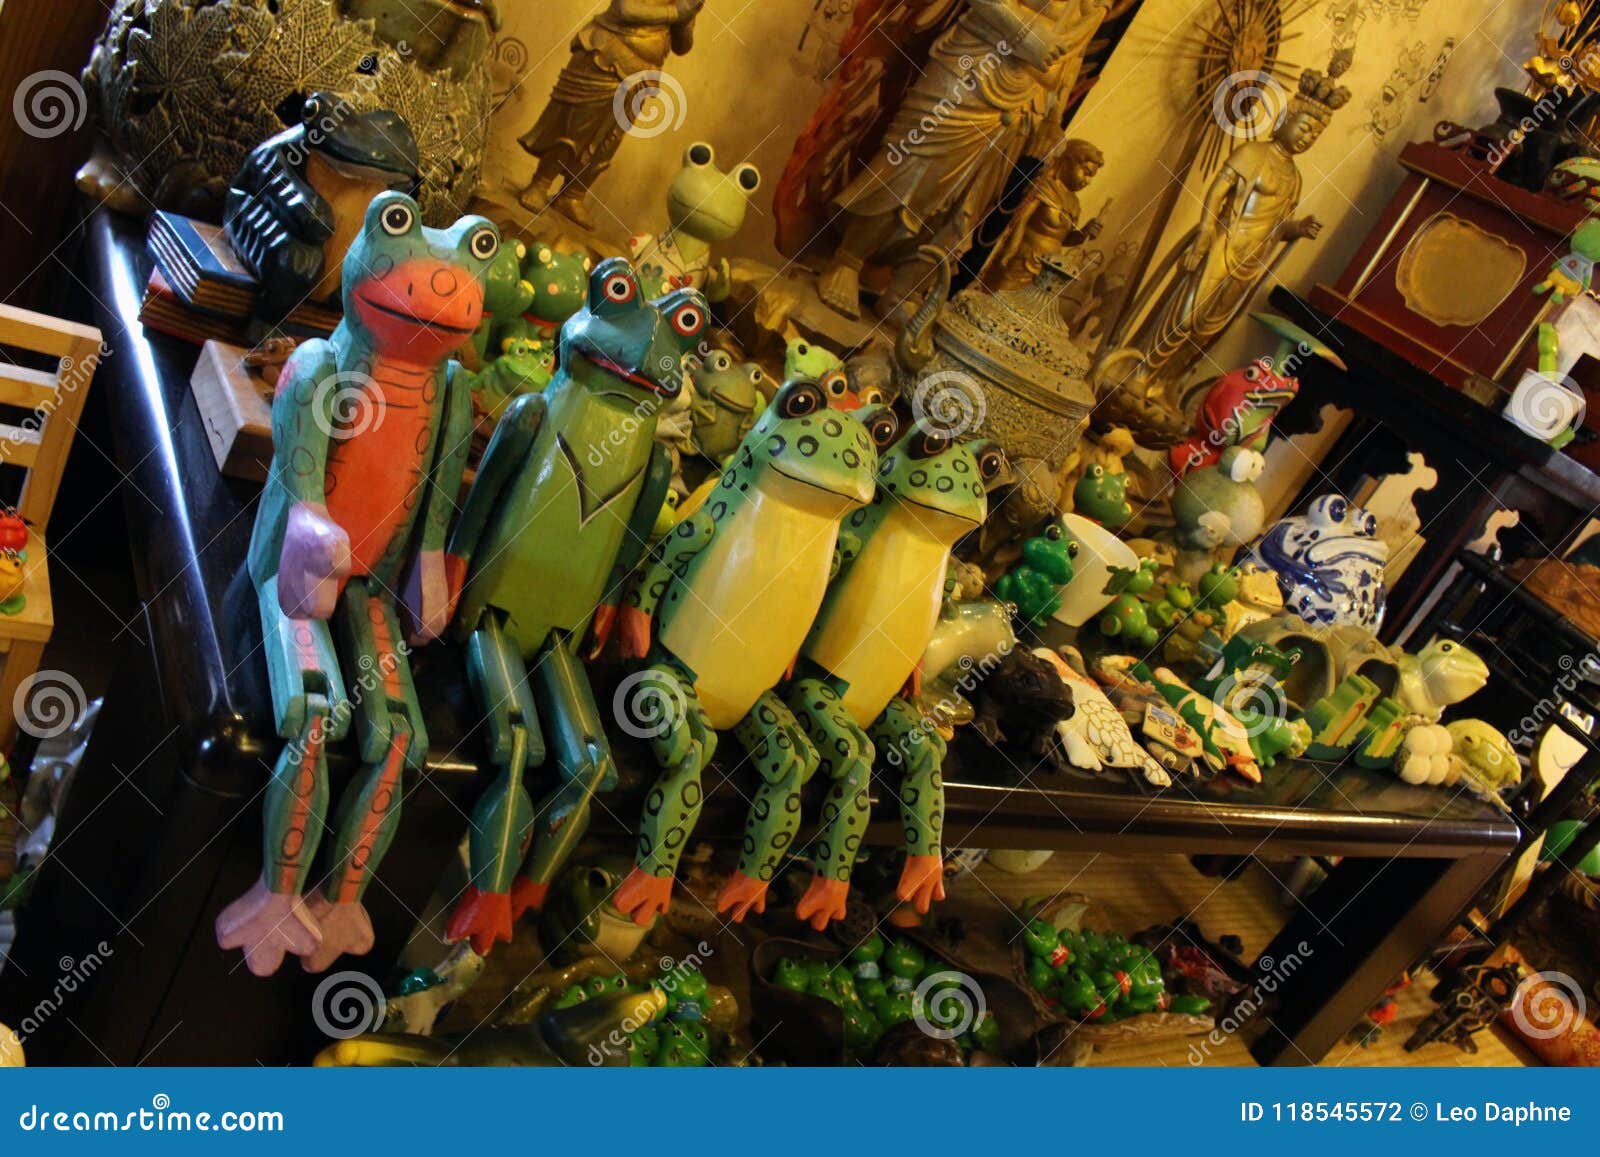 The Room Full of Frog Stuff at Editorial Photography - Image of